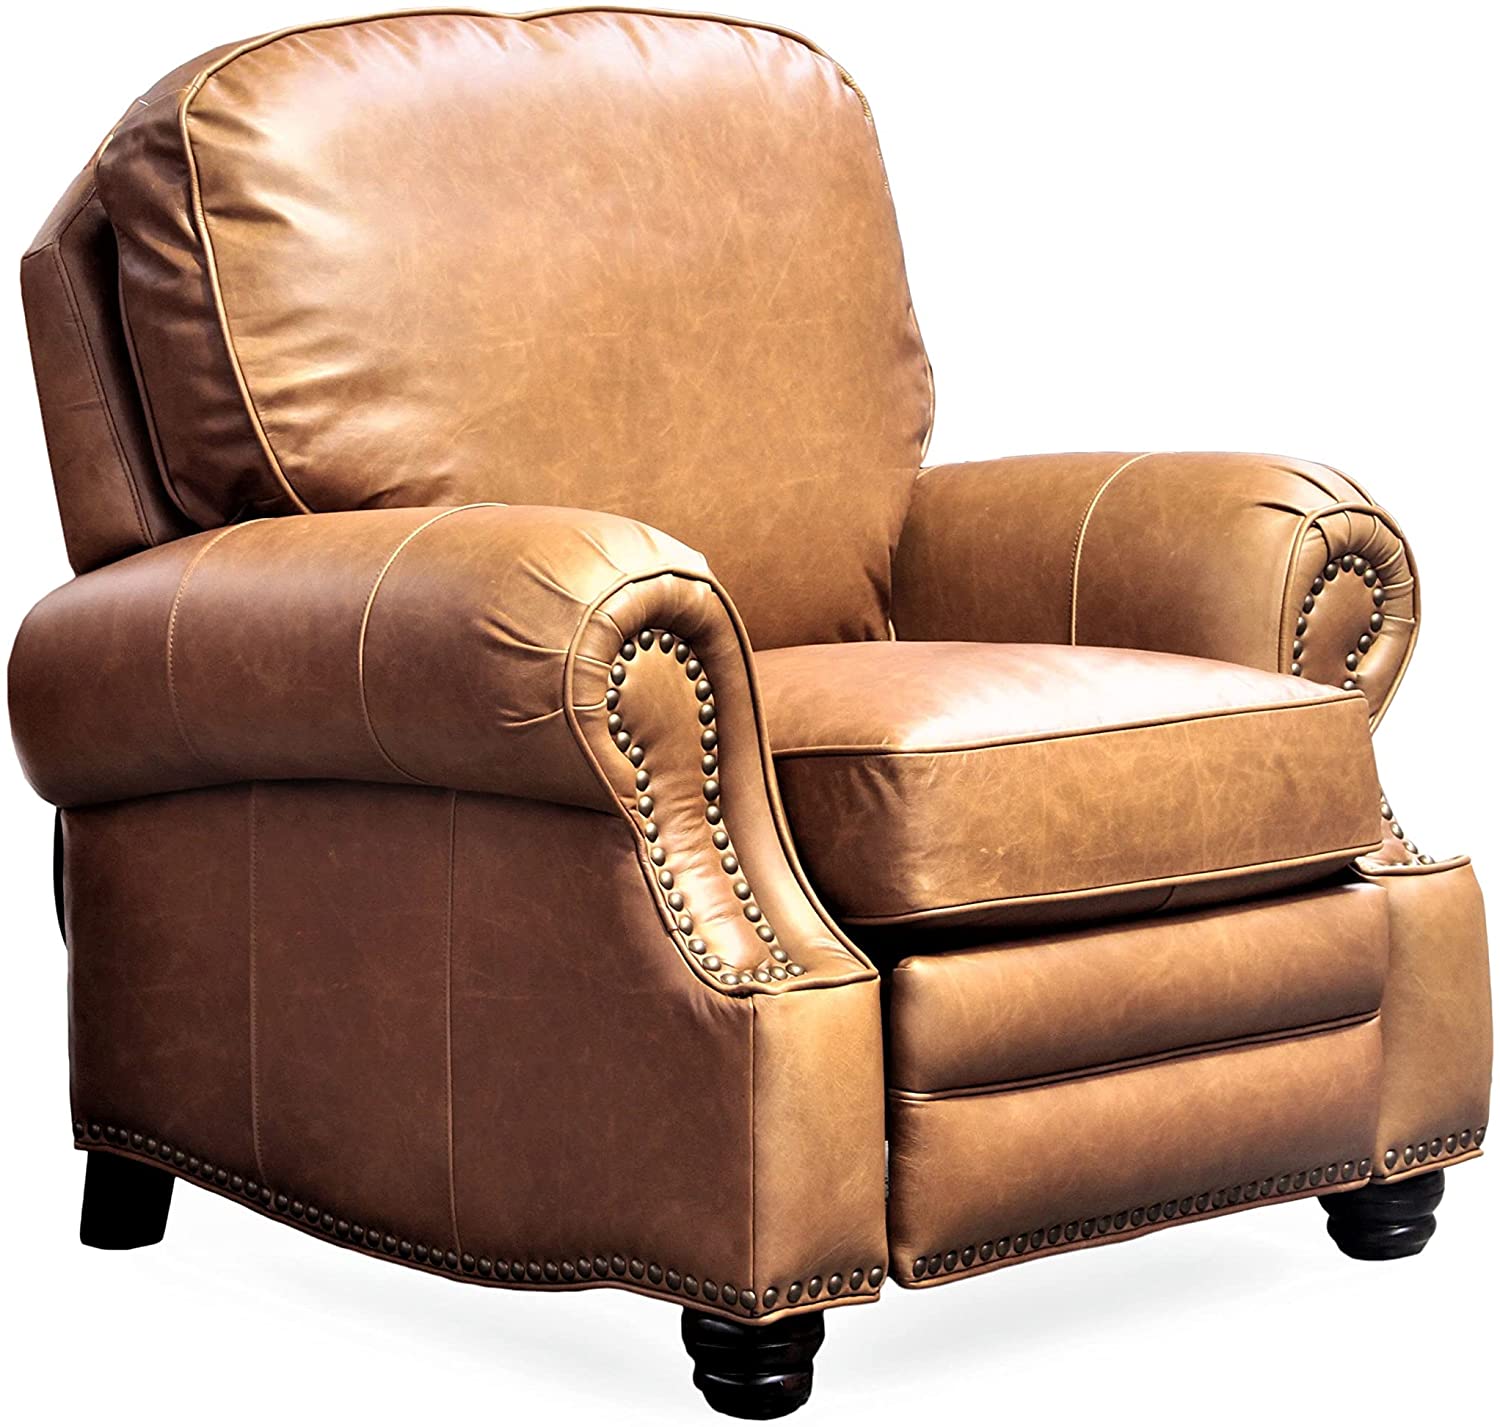 Barcalounger leather recliner